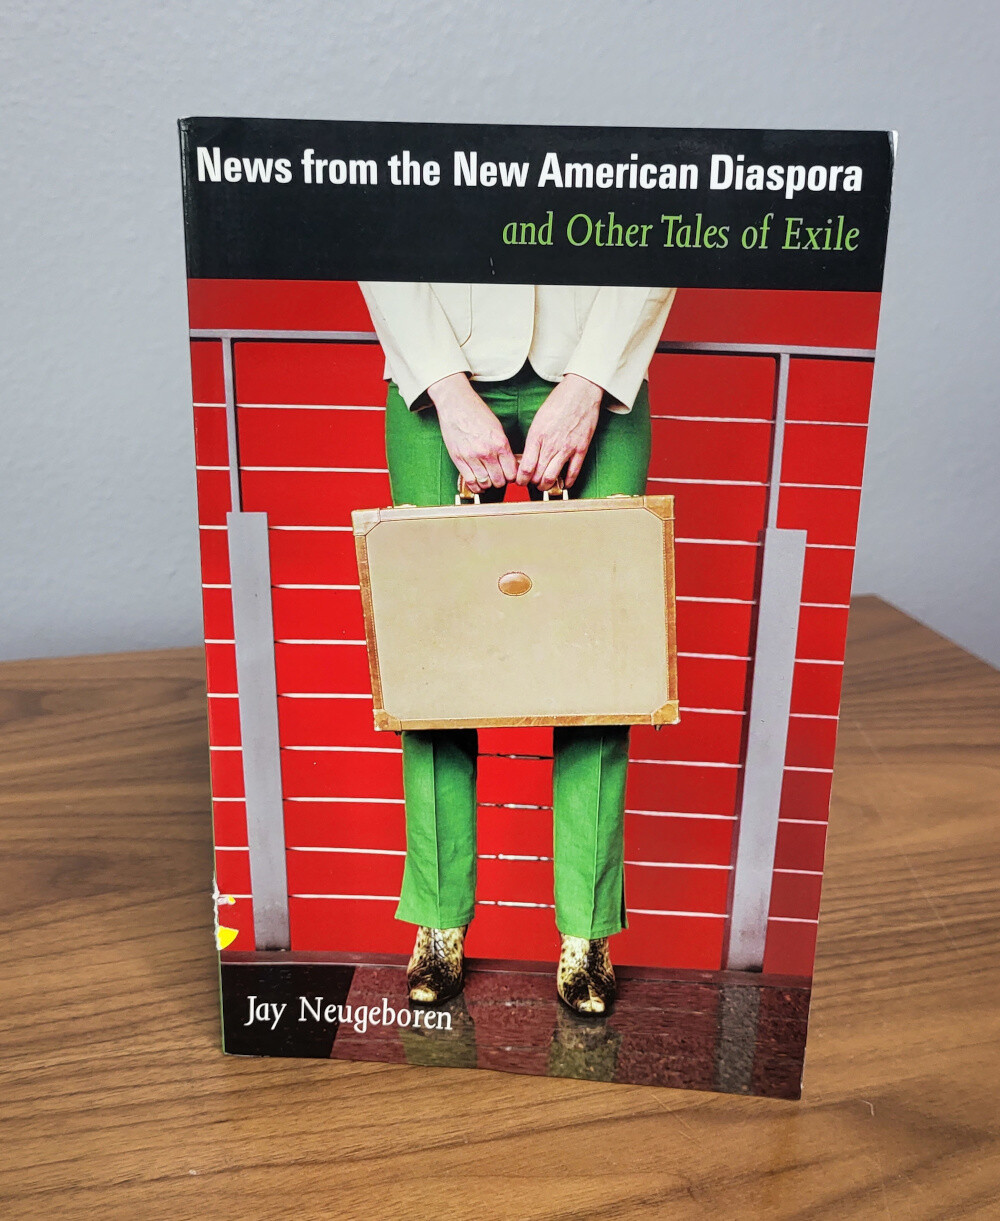 News from the New American Diaspora by Jay Neugeboren – Inscribed